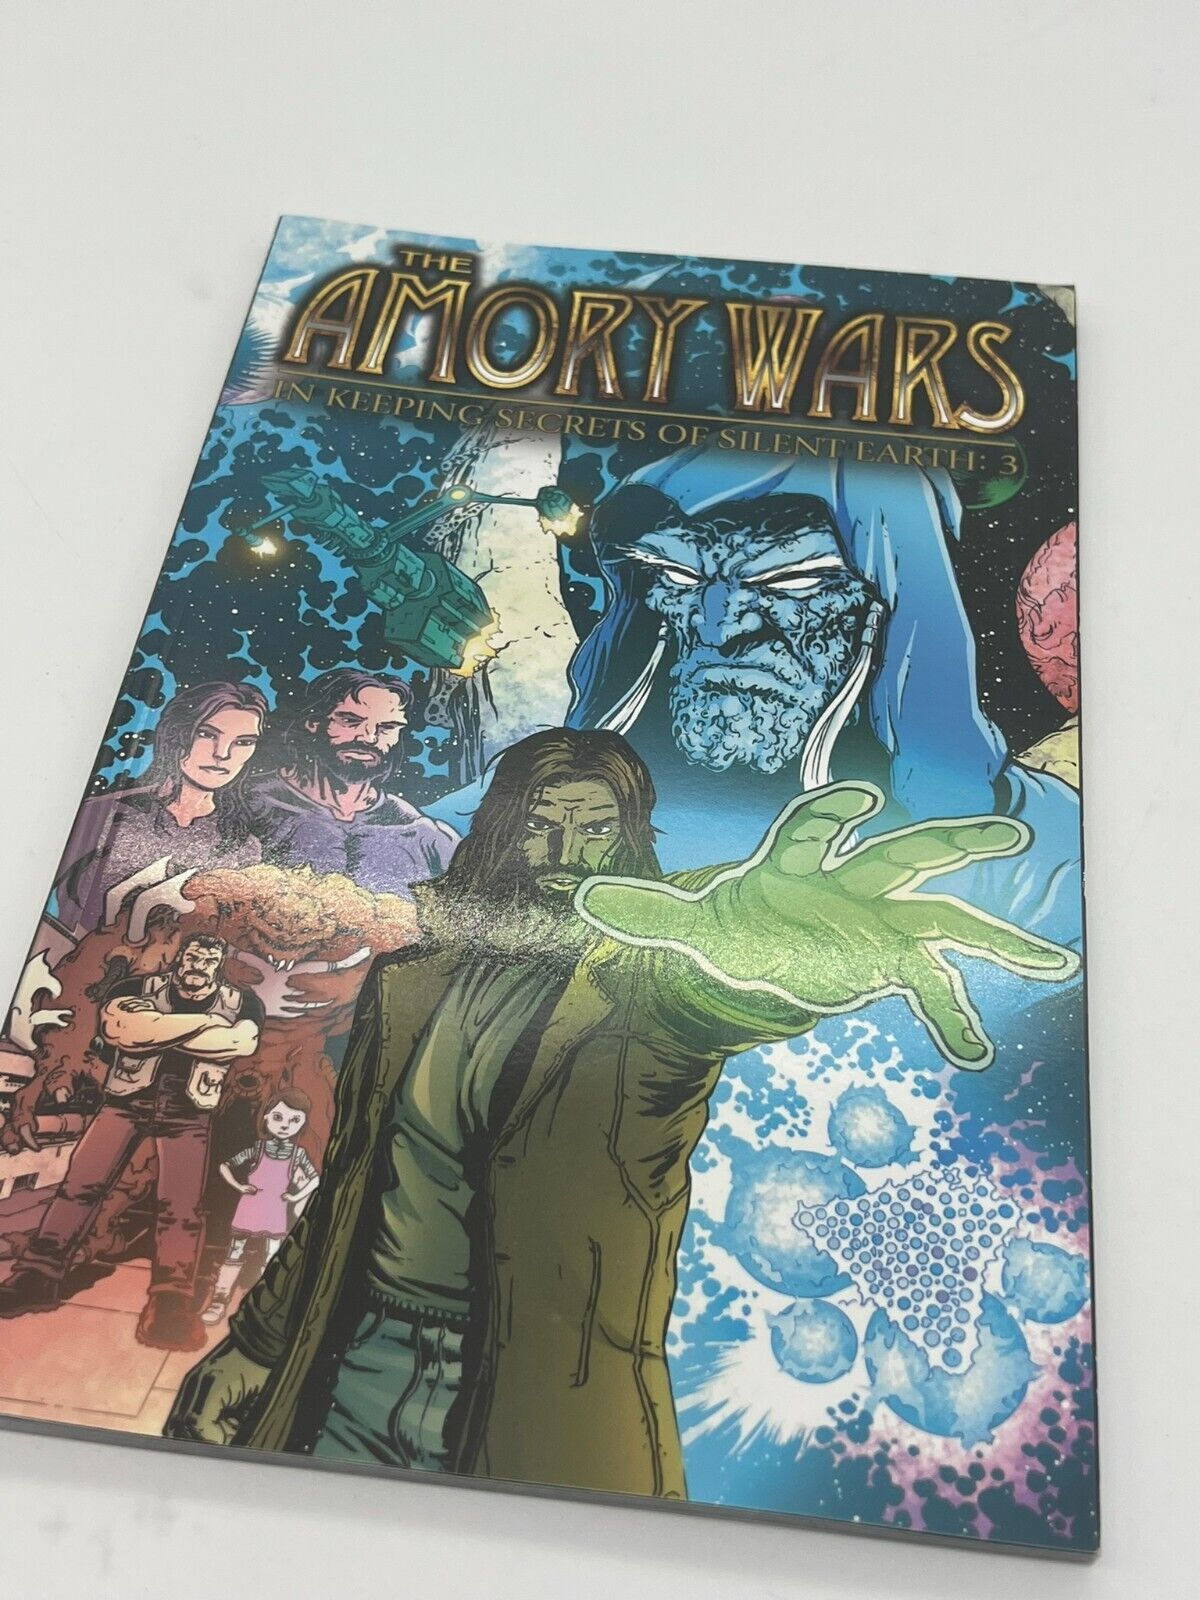 Amory Wars Vol 3 In Keeping Secrets of Silent Earth 3 Paperback Graphic Novel